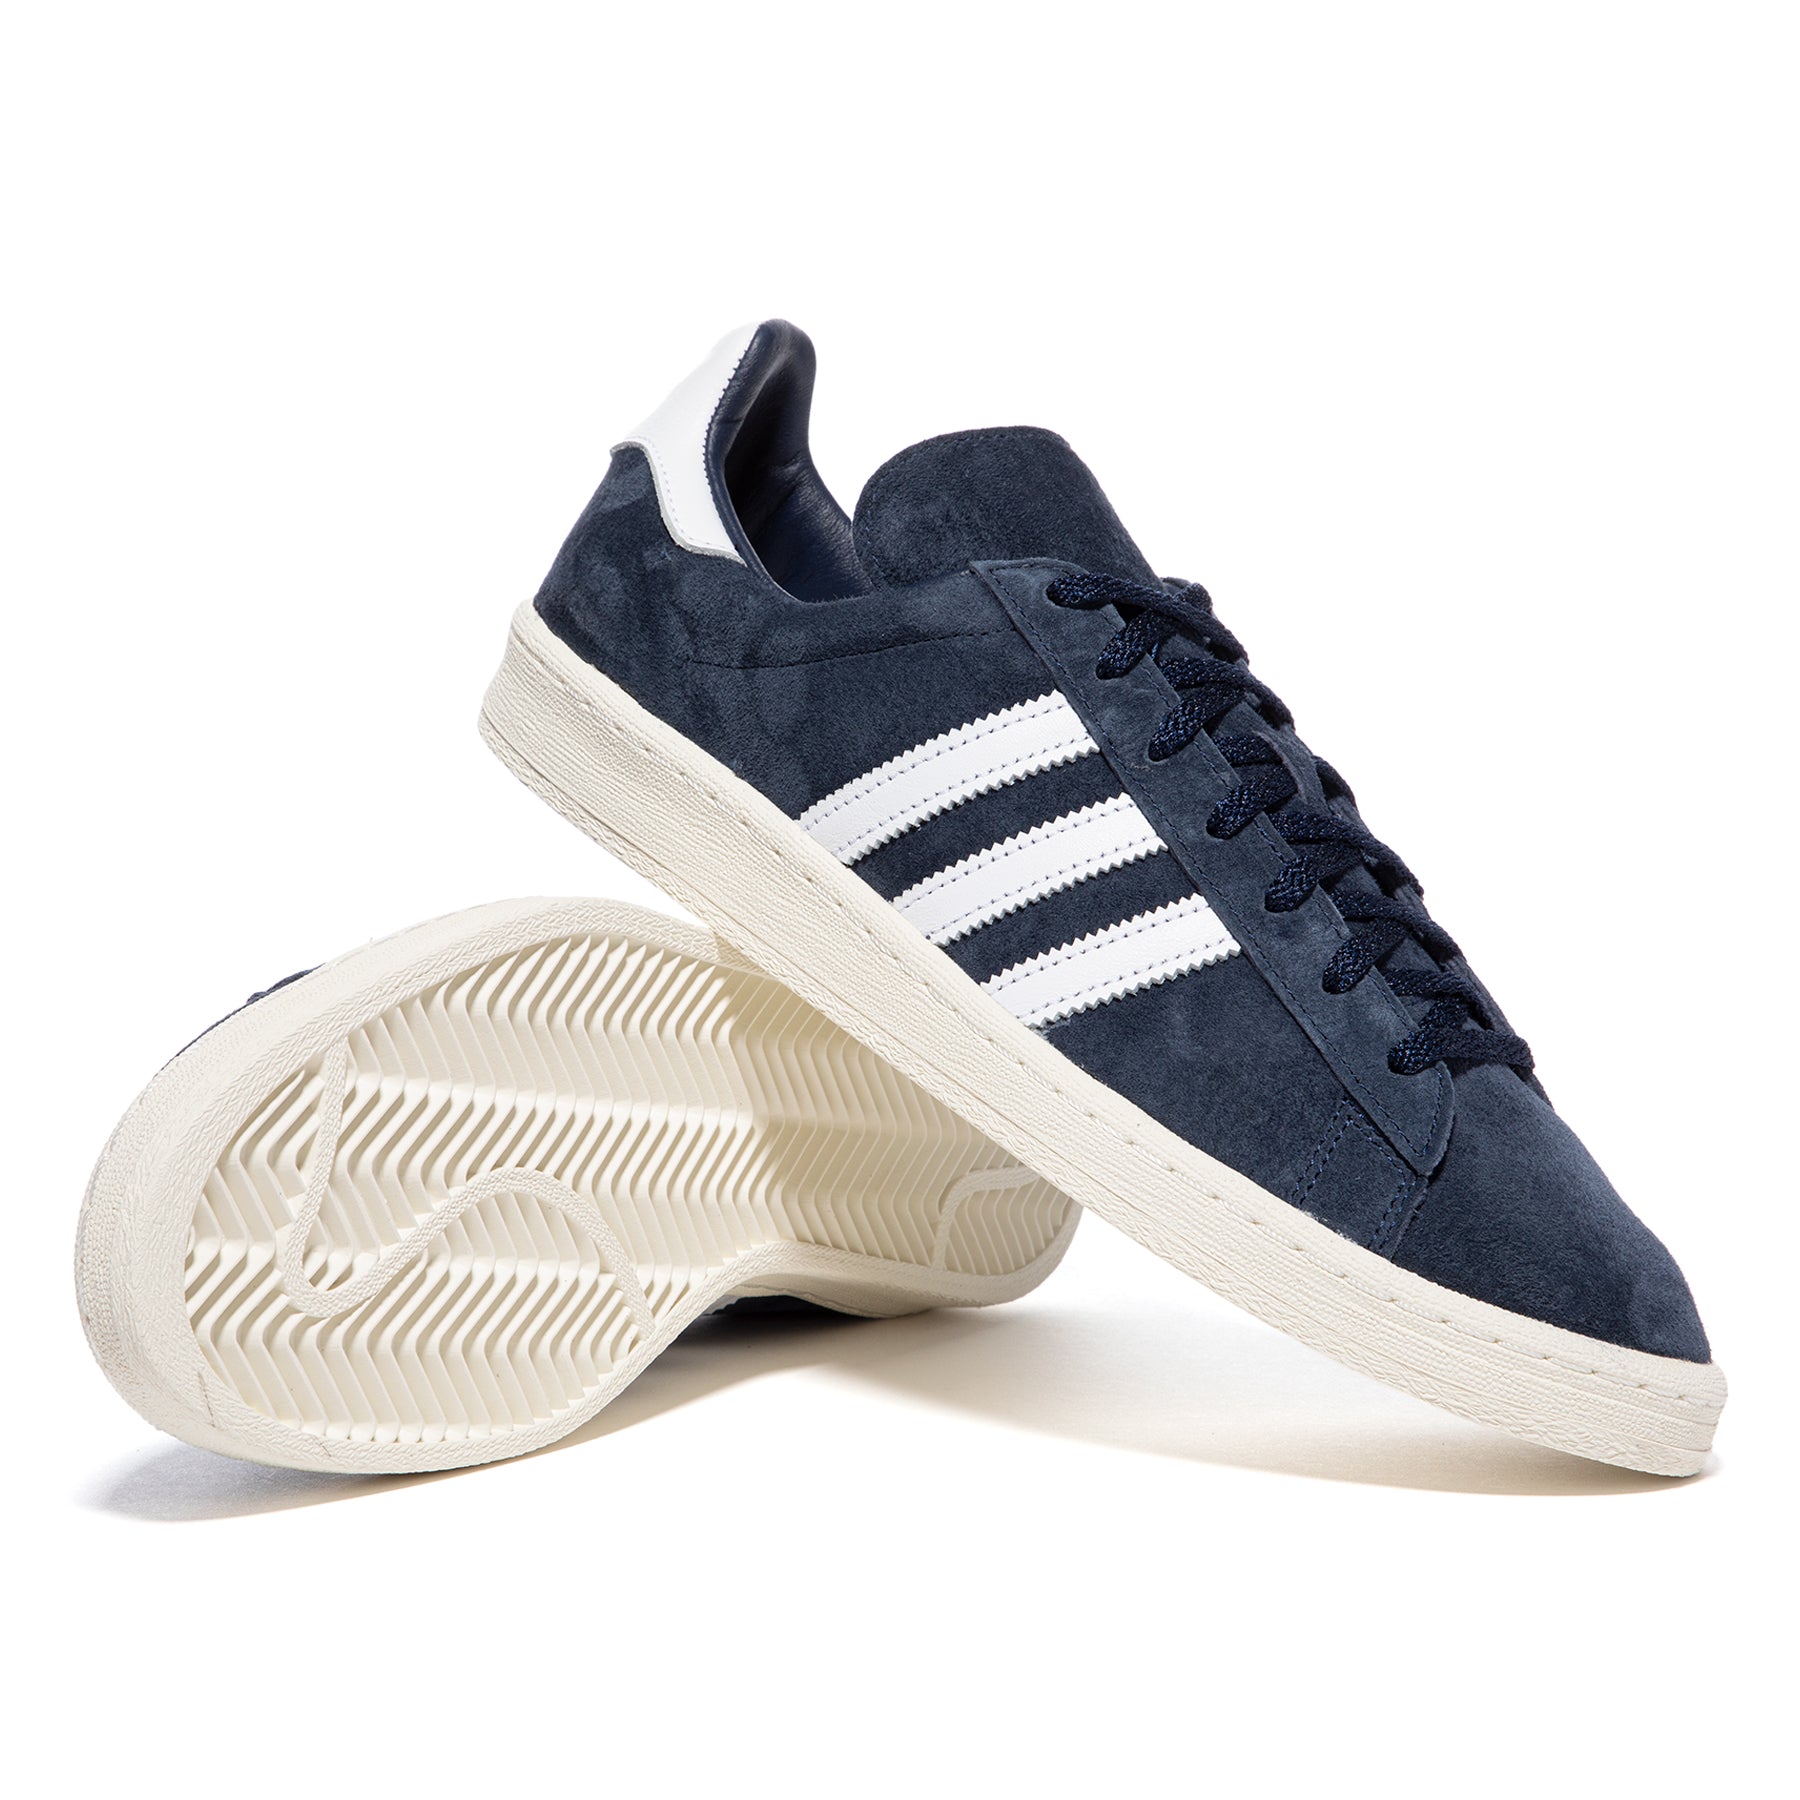 adidas Campus (Collegiate Navy/Cloud White/Off White) – Concepts